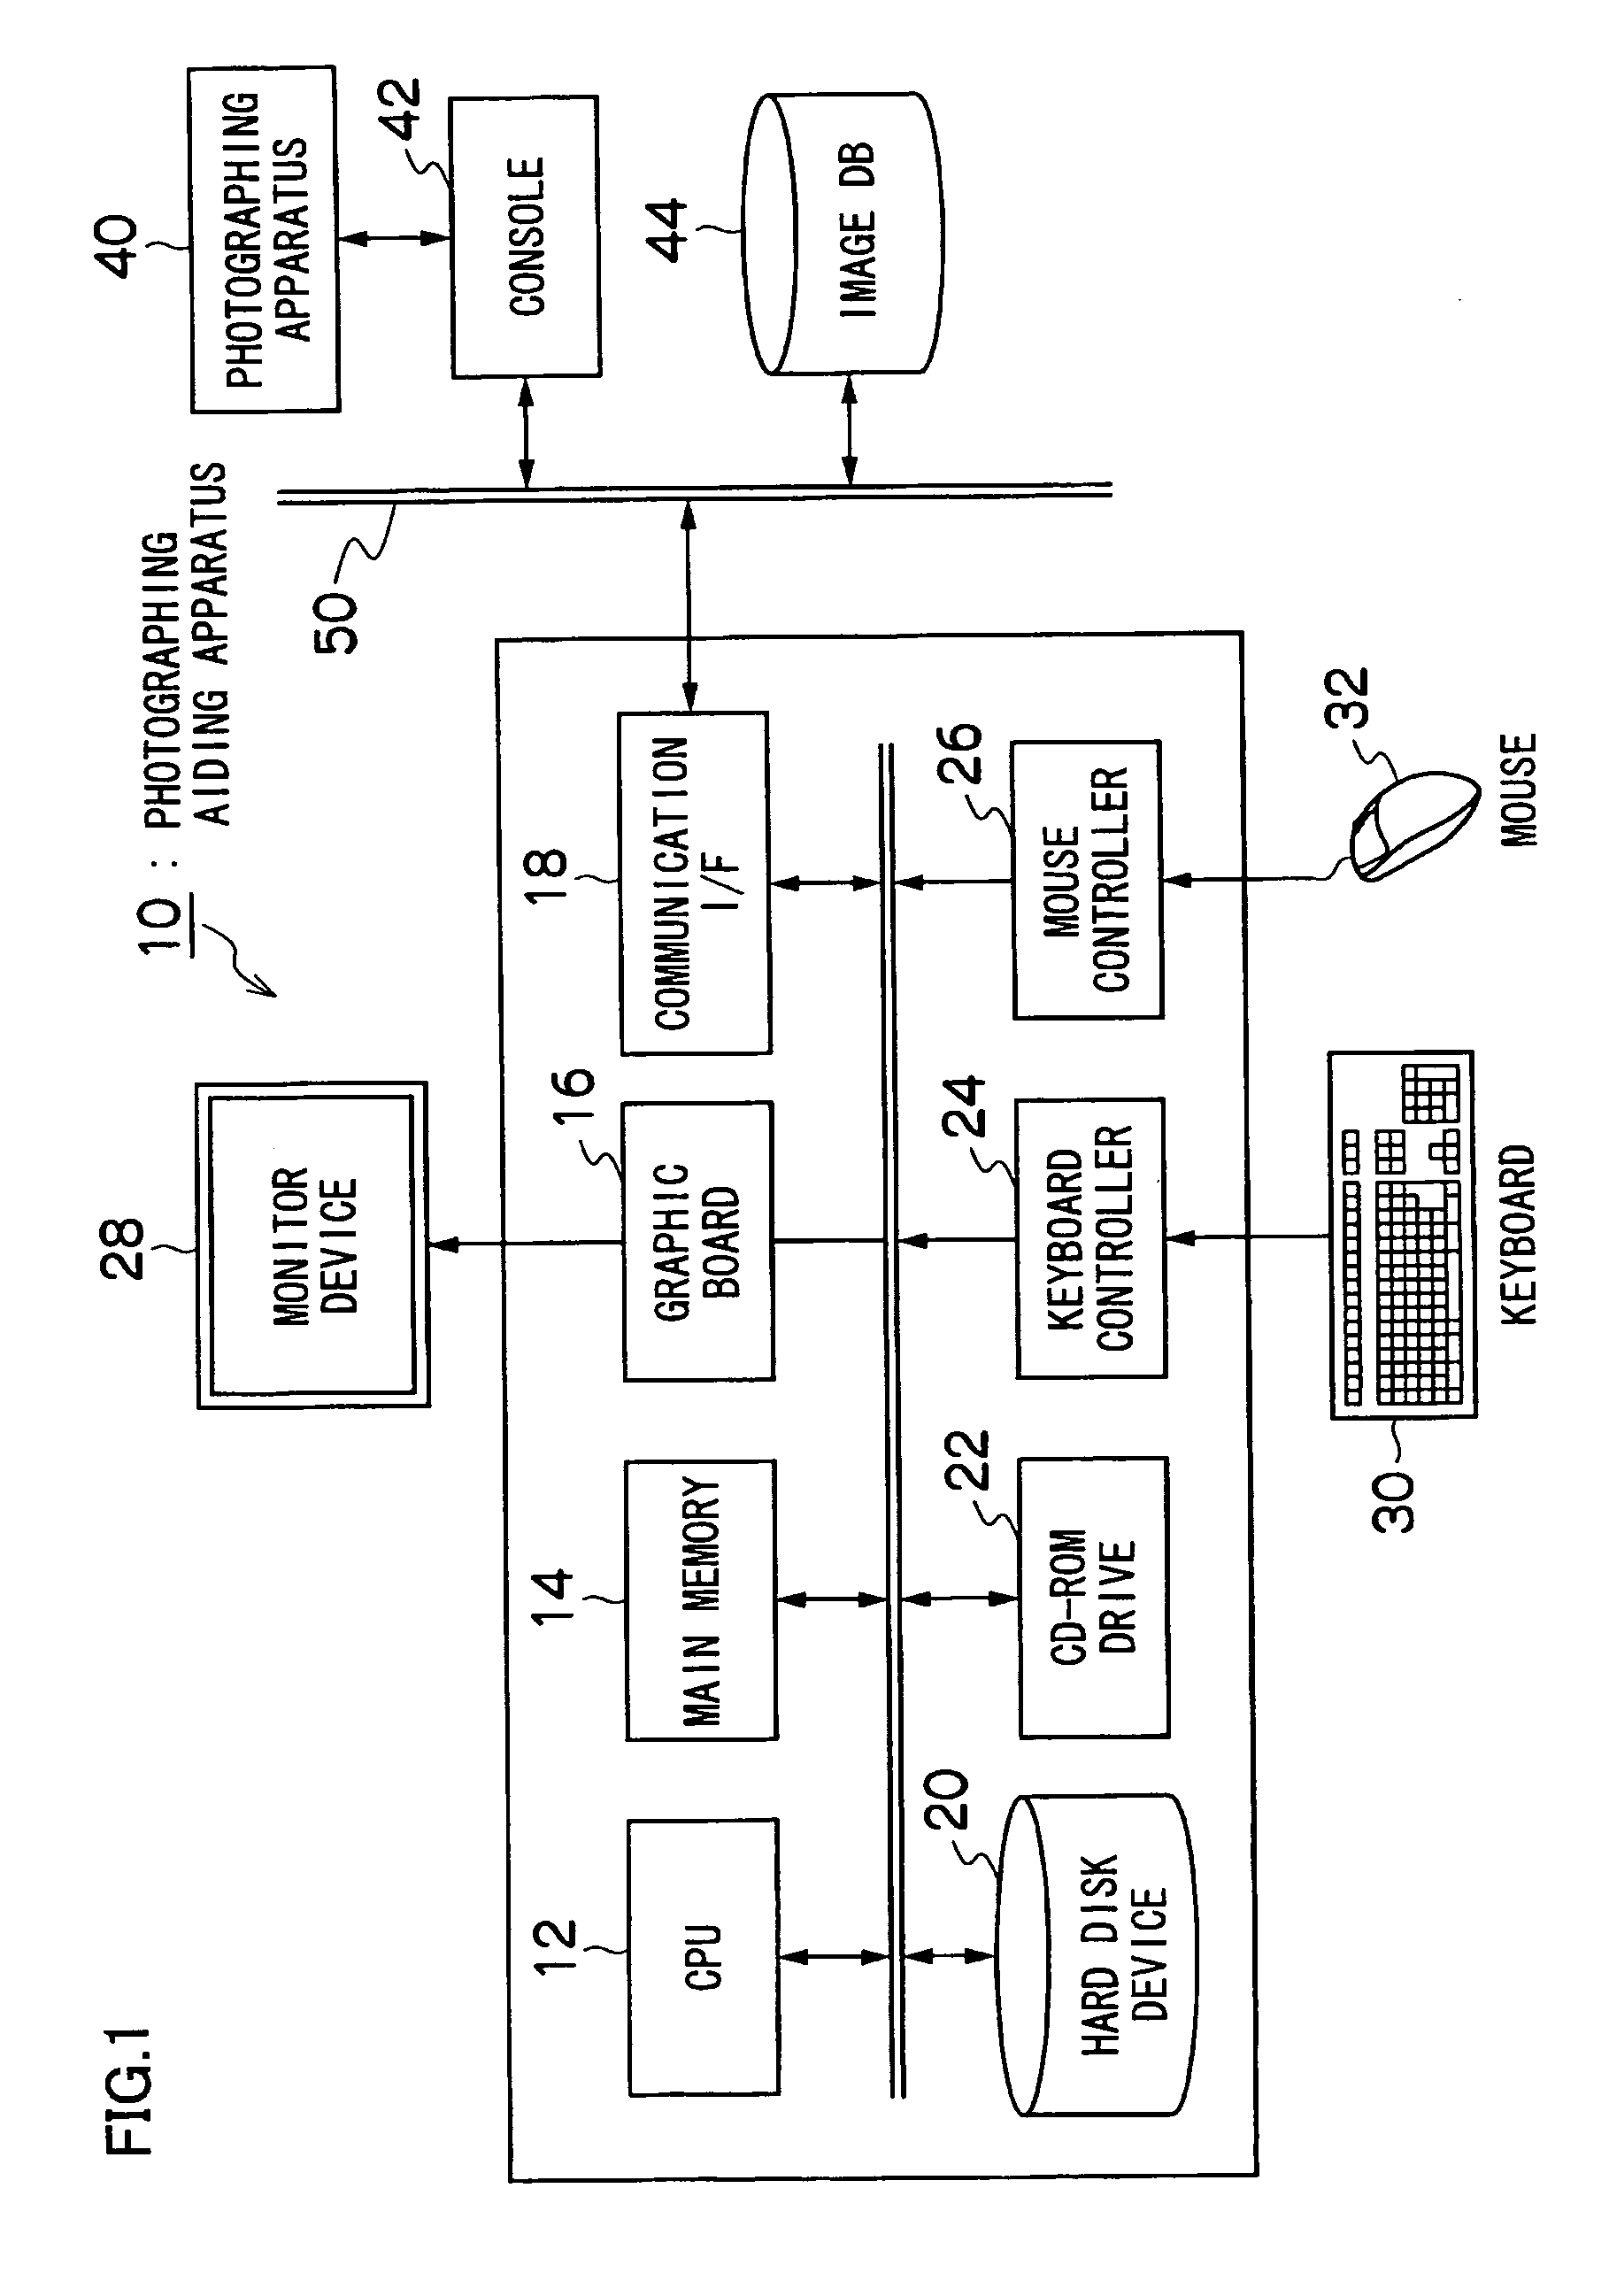 Apparatus for aiding photographing of medical image and computer program product for the same